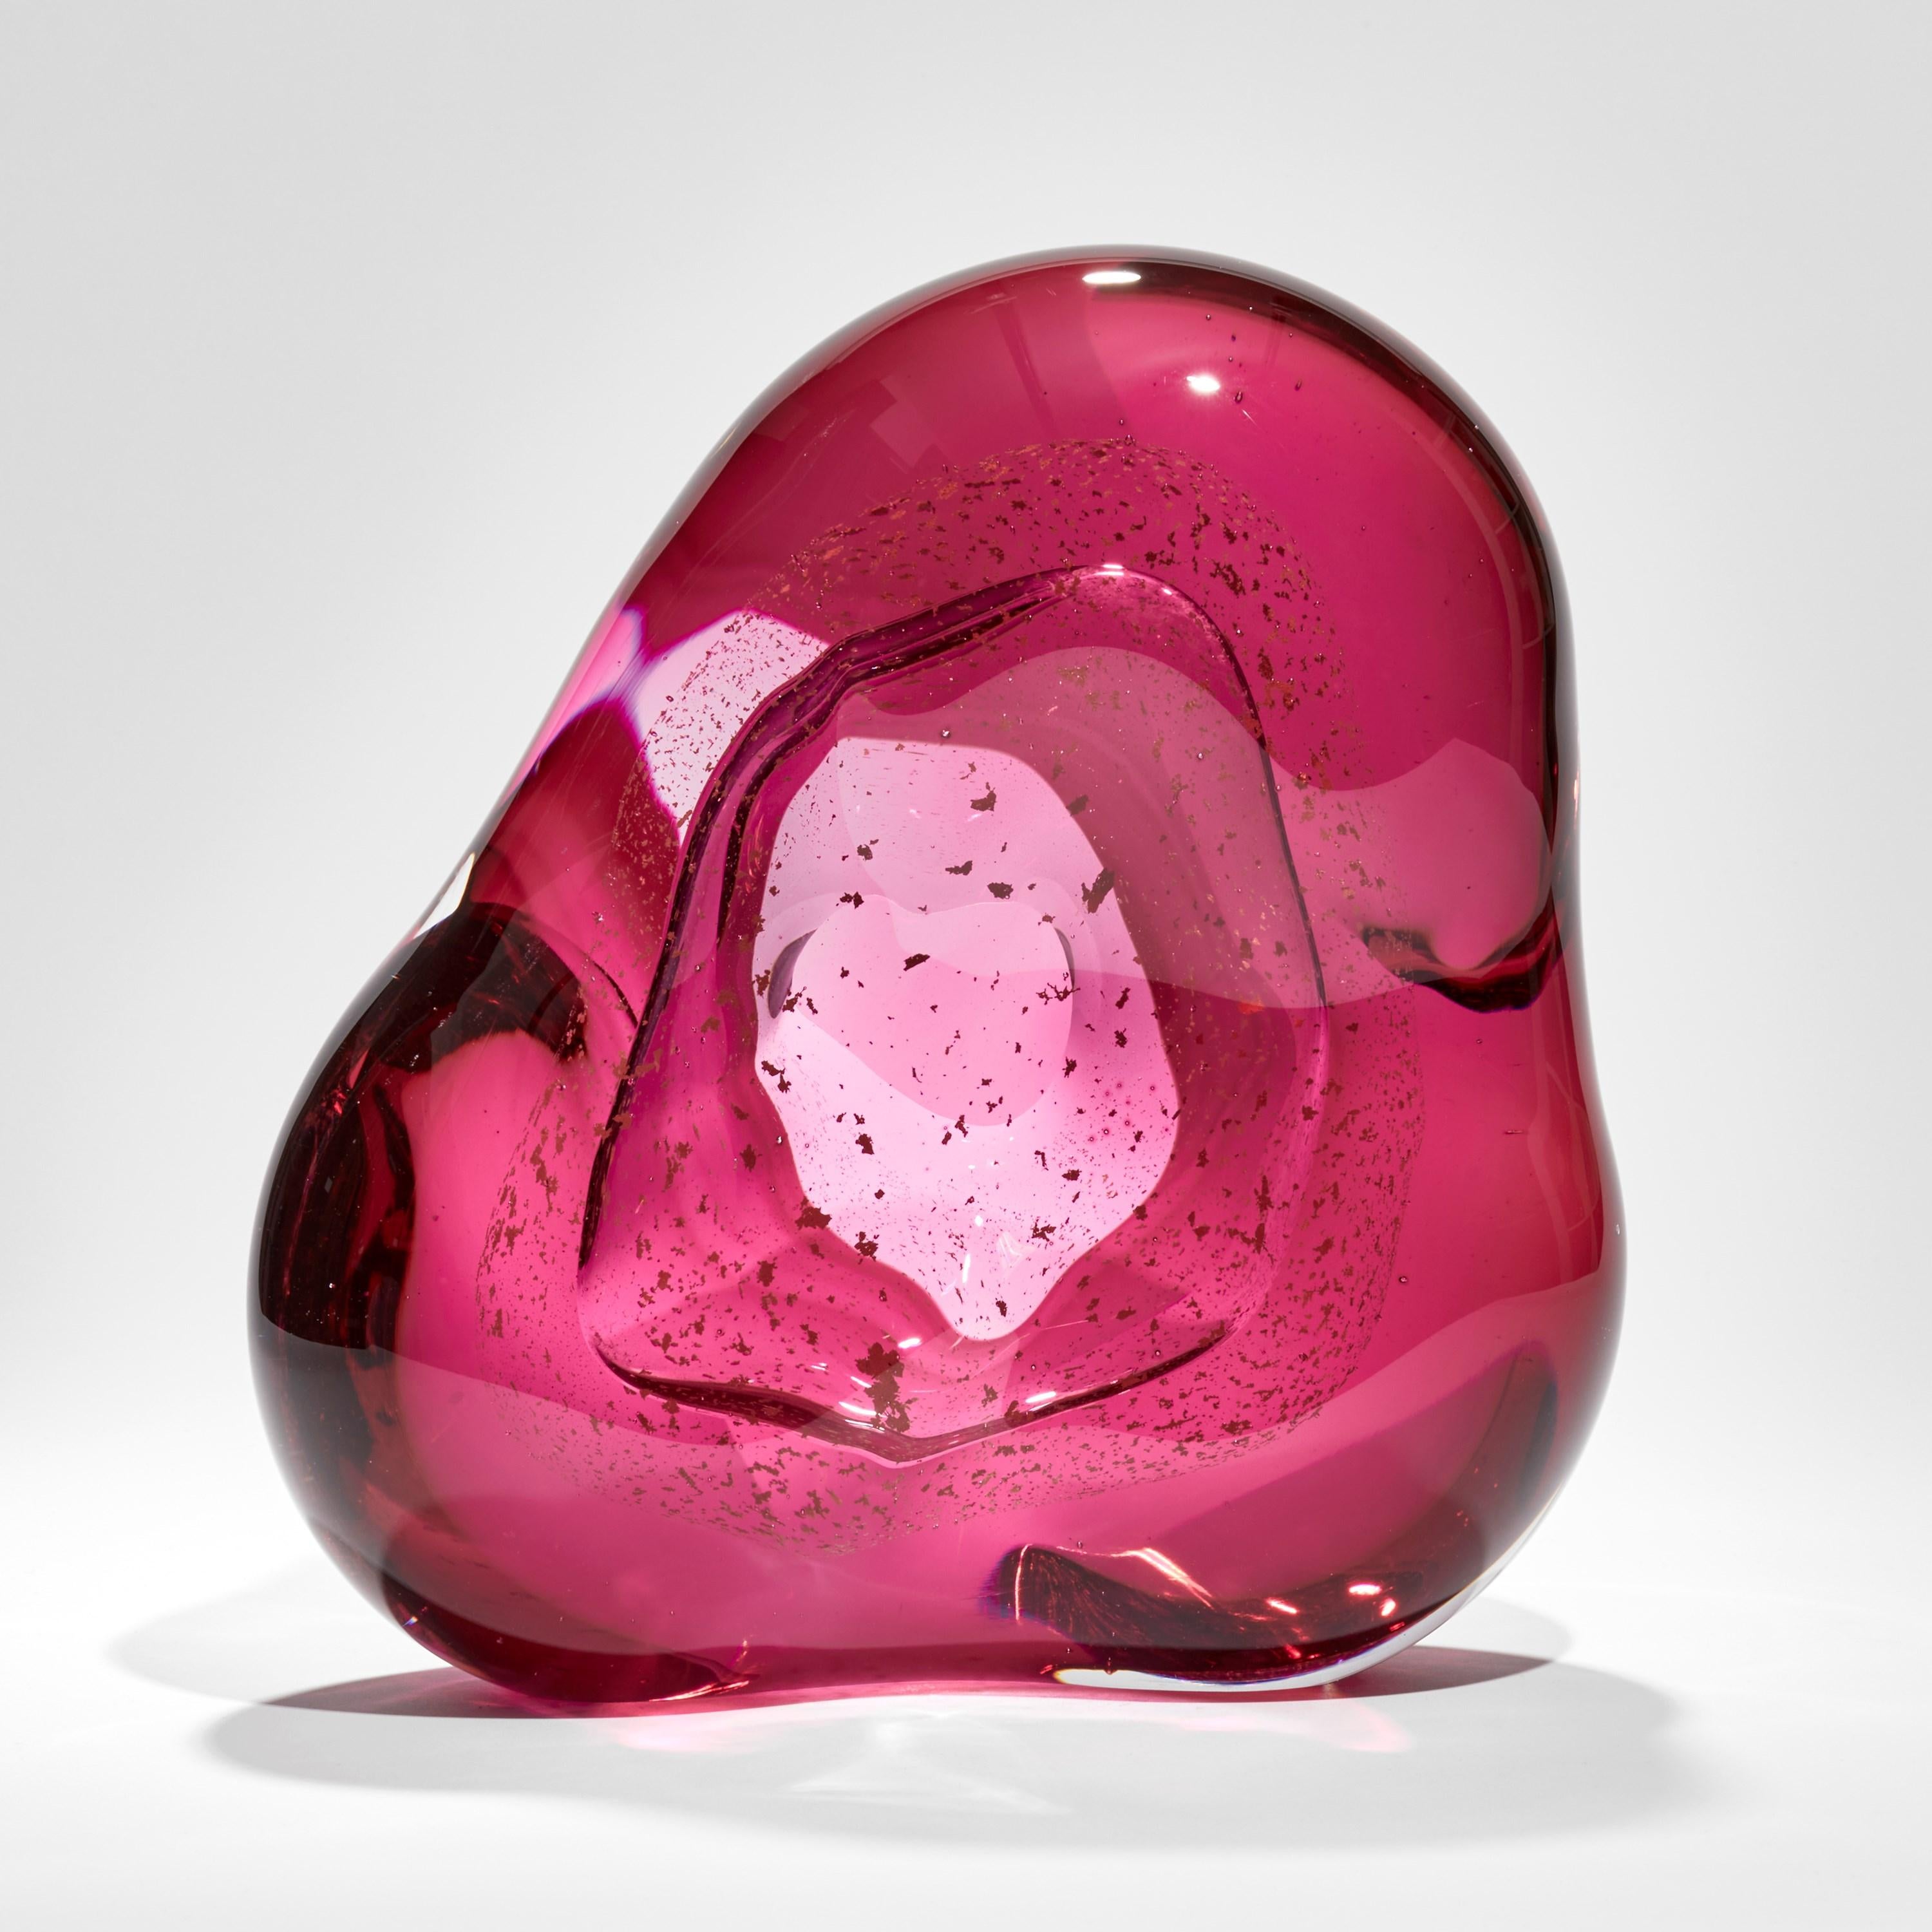 Organic Modern Oro Vug in Fuchsia I, Gold & Pink Glass Geode Sculpture by Samantha Donaldson For Sale